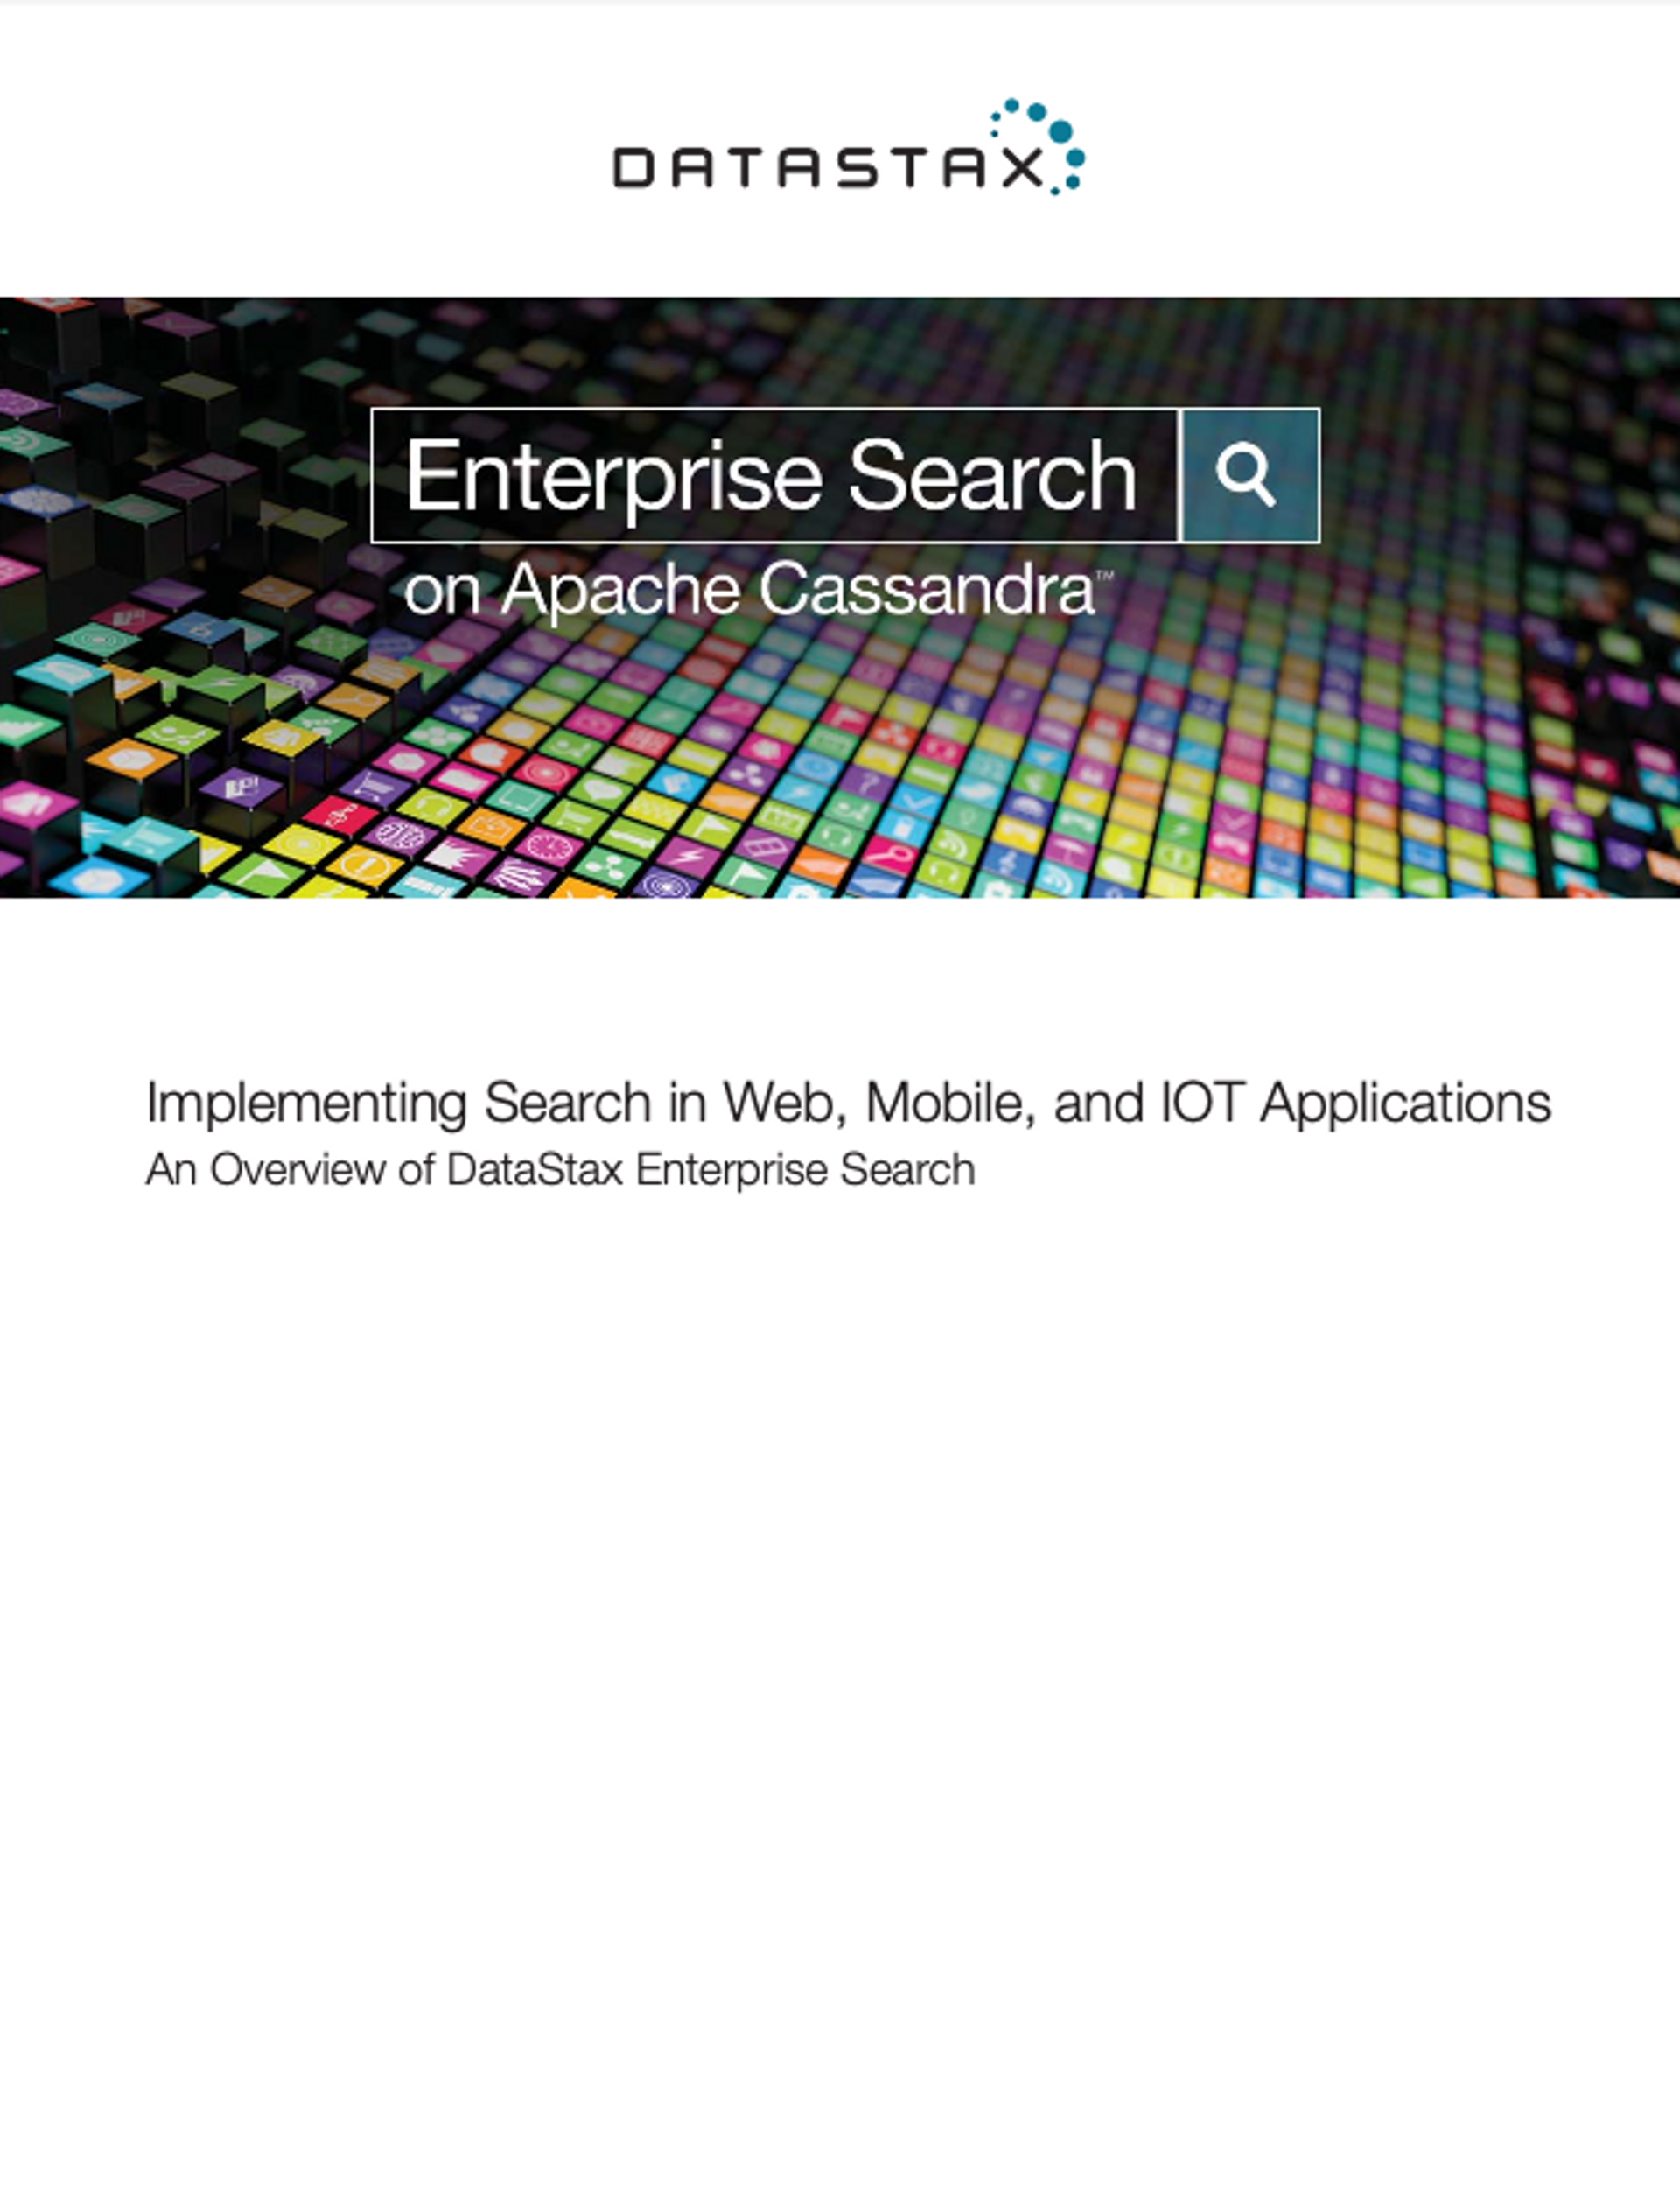 Implementing Search in Web, Mobile and IoT Applications